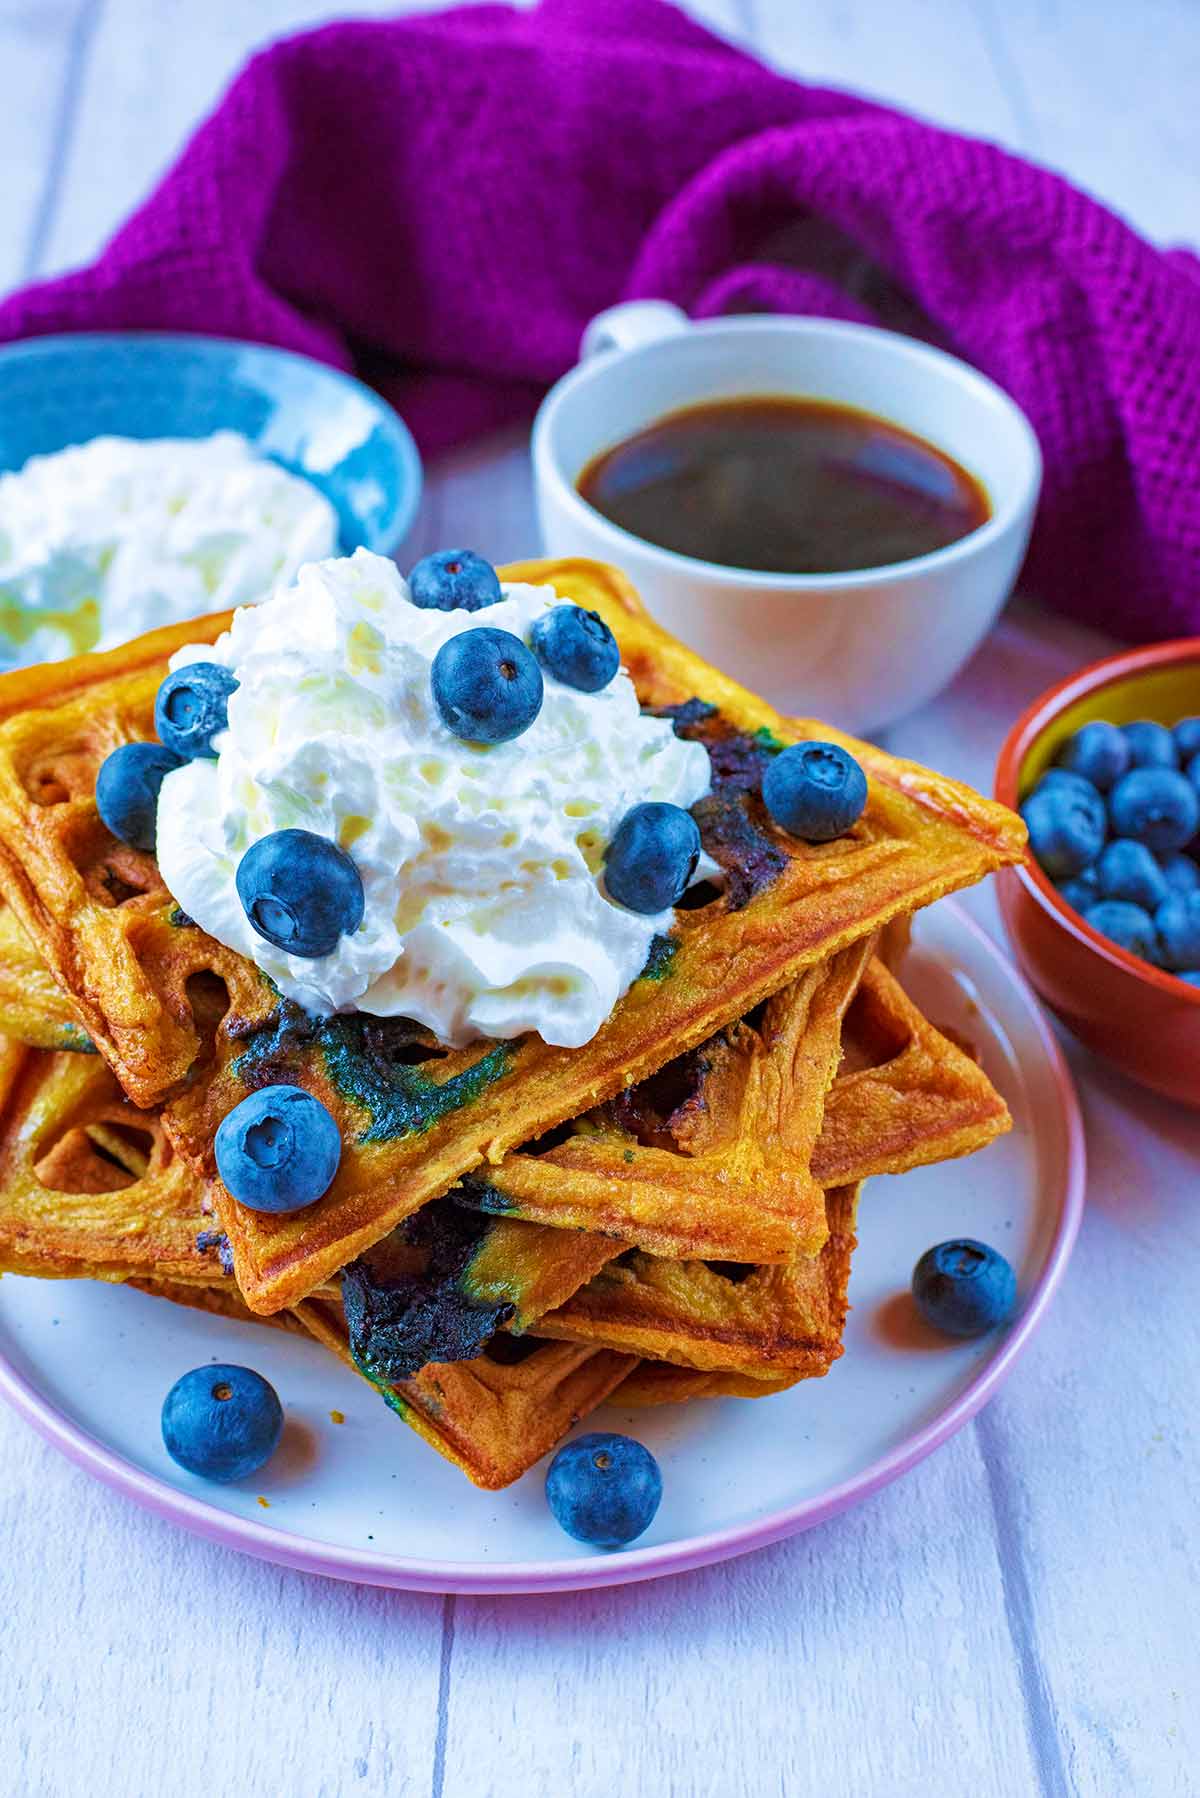 A plate of waffles topped with whipped cream and blueberries.